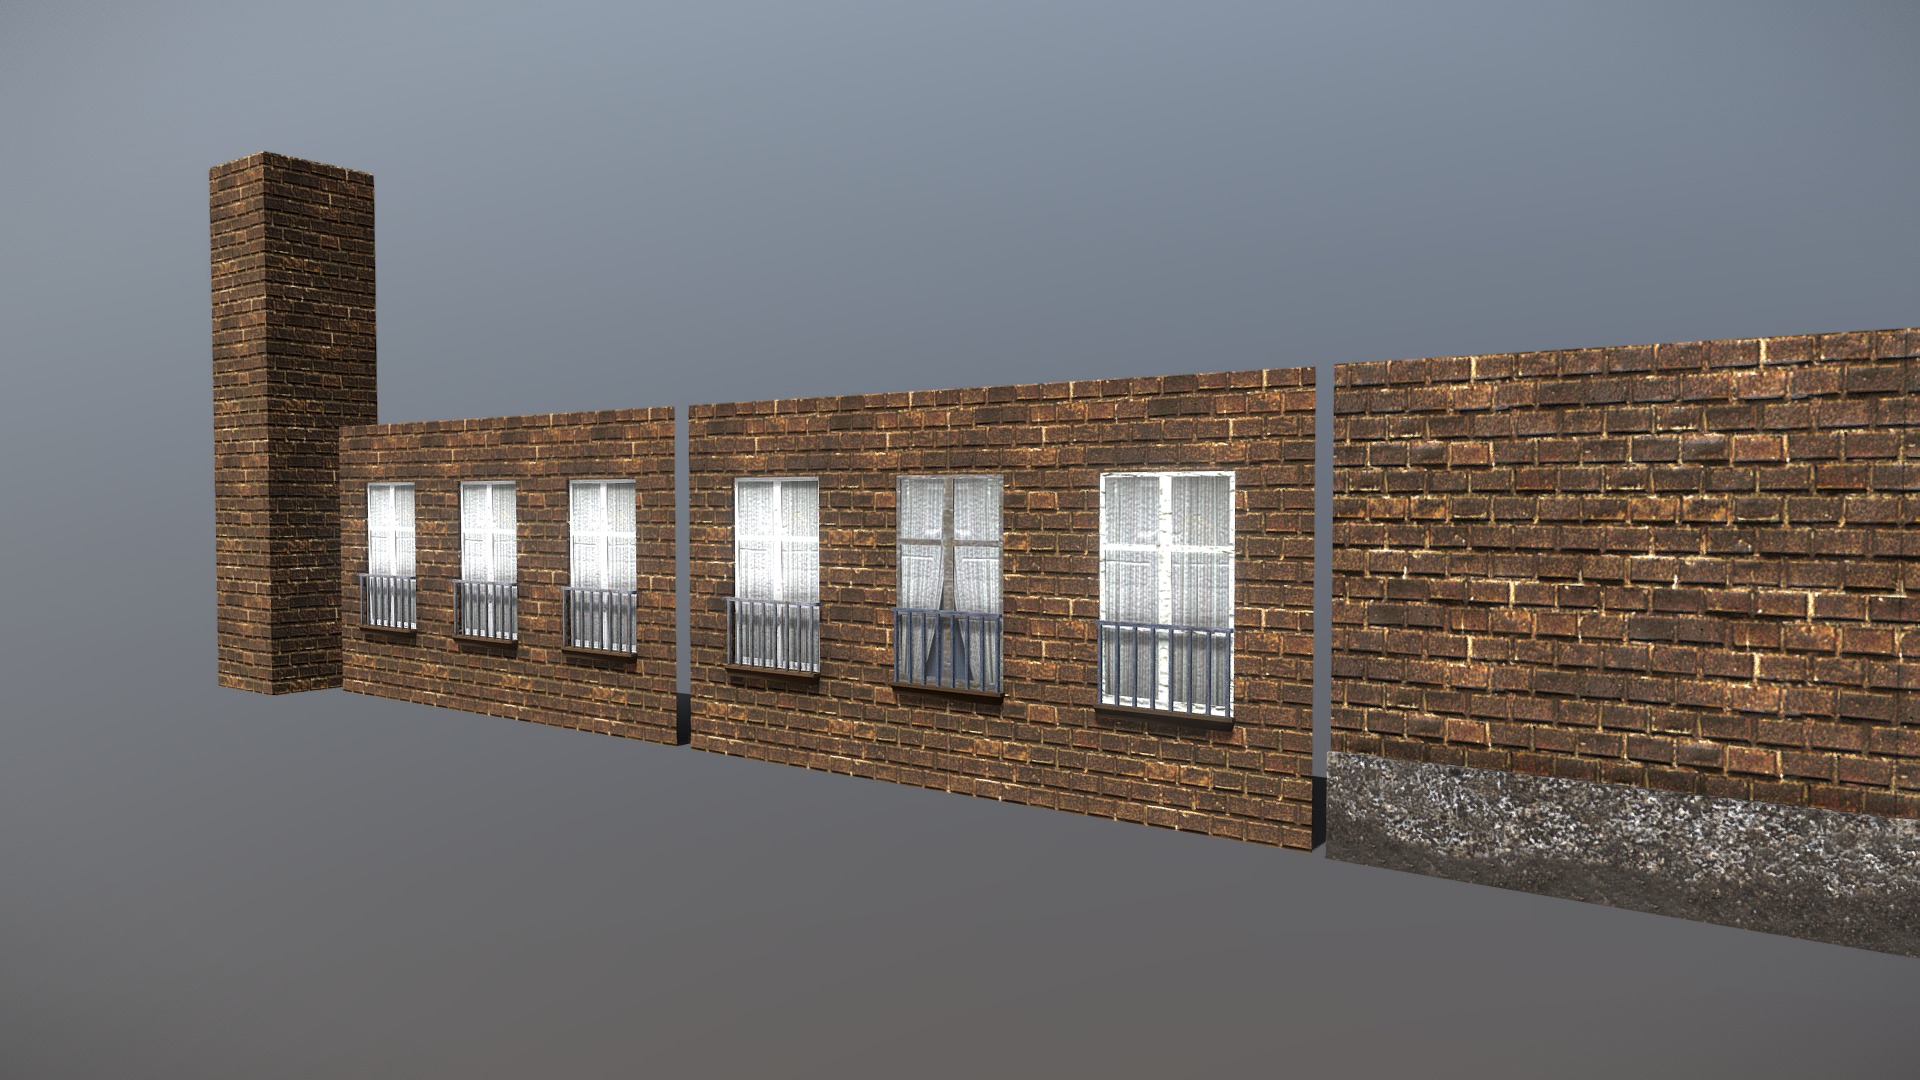 3D model Simple Low Poly Building Assets - This is a 3D model of the Simple Low Poly Building Assets. The 3D model is about a brick building with windows.